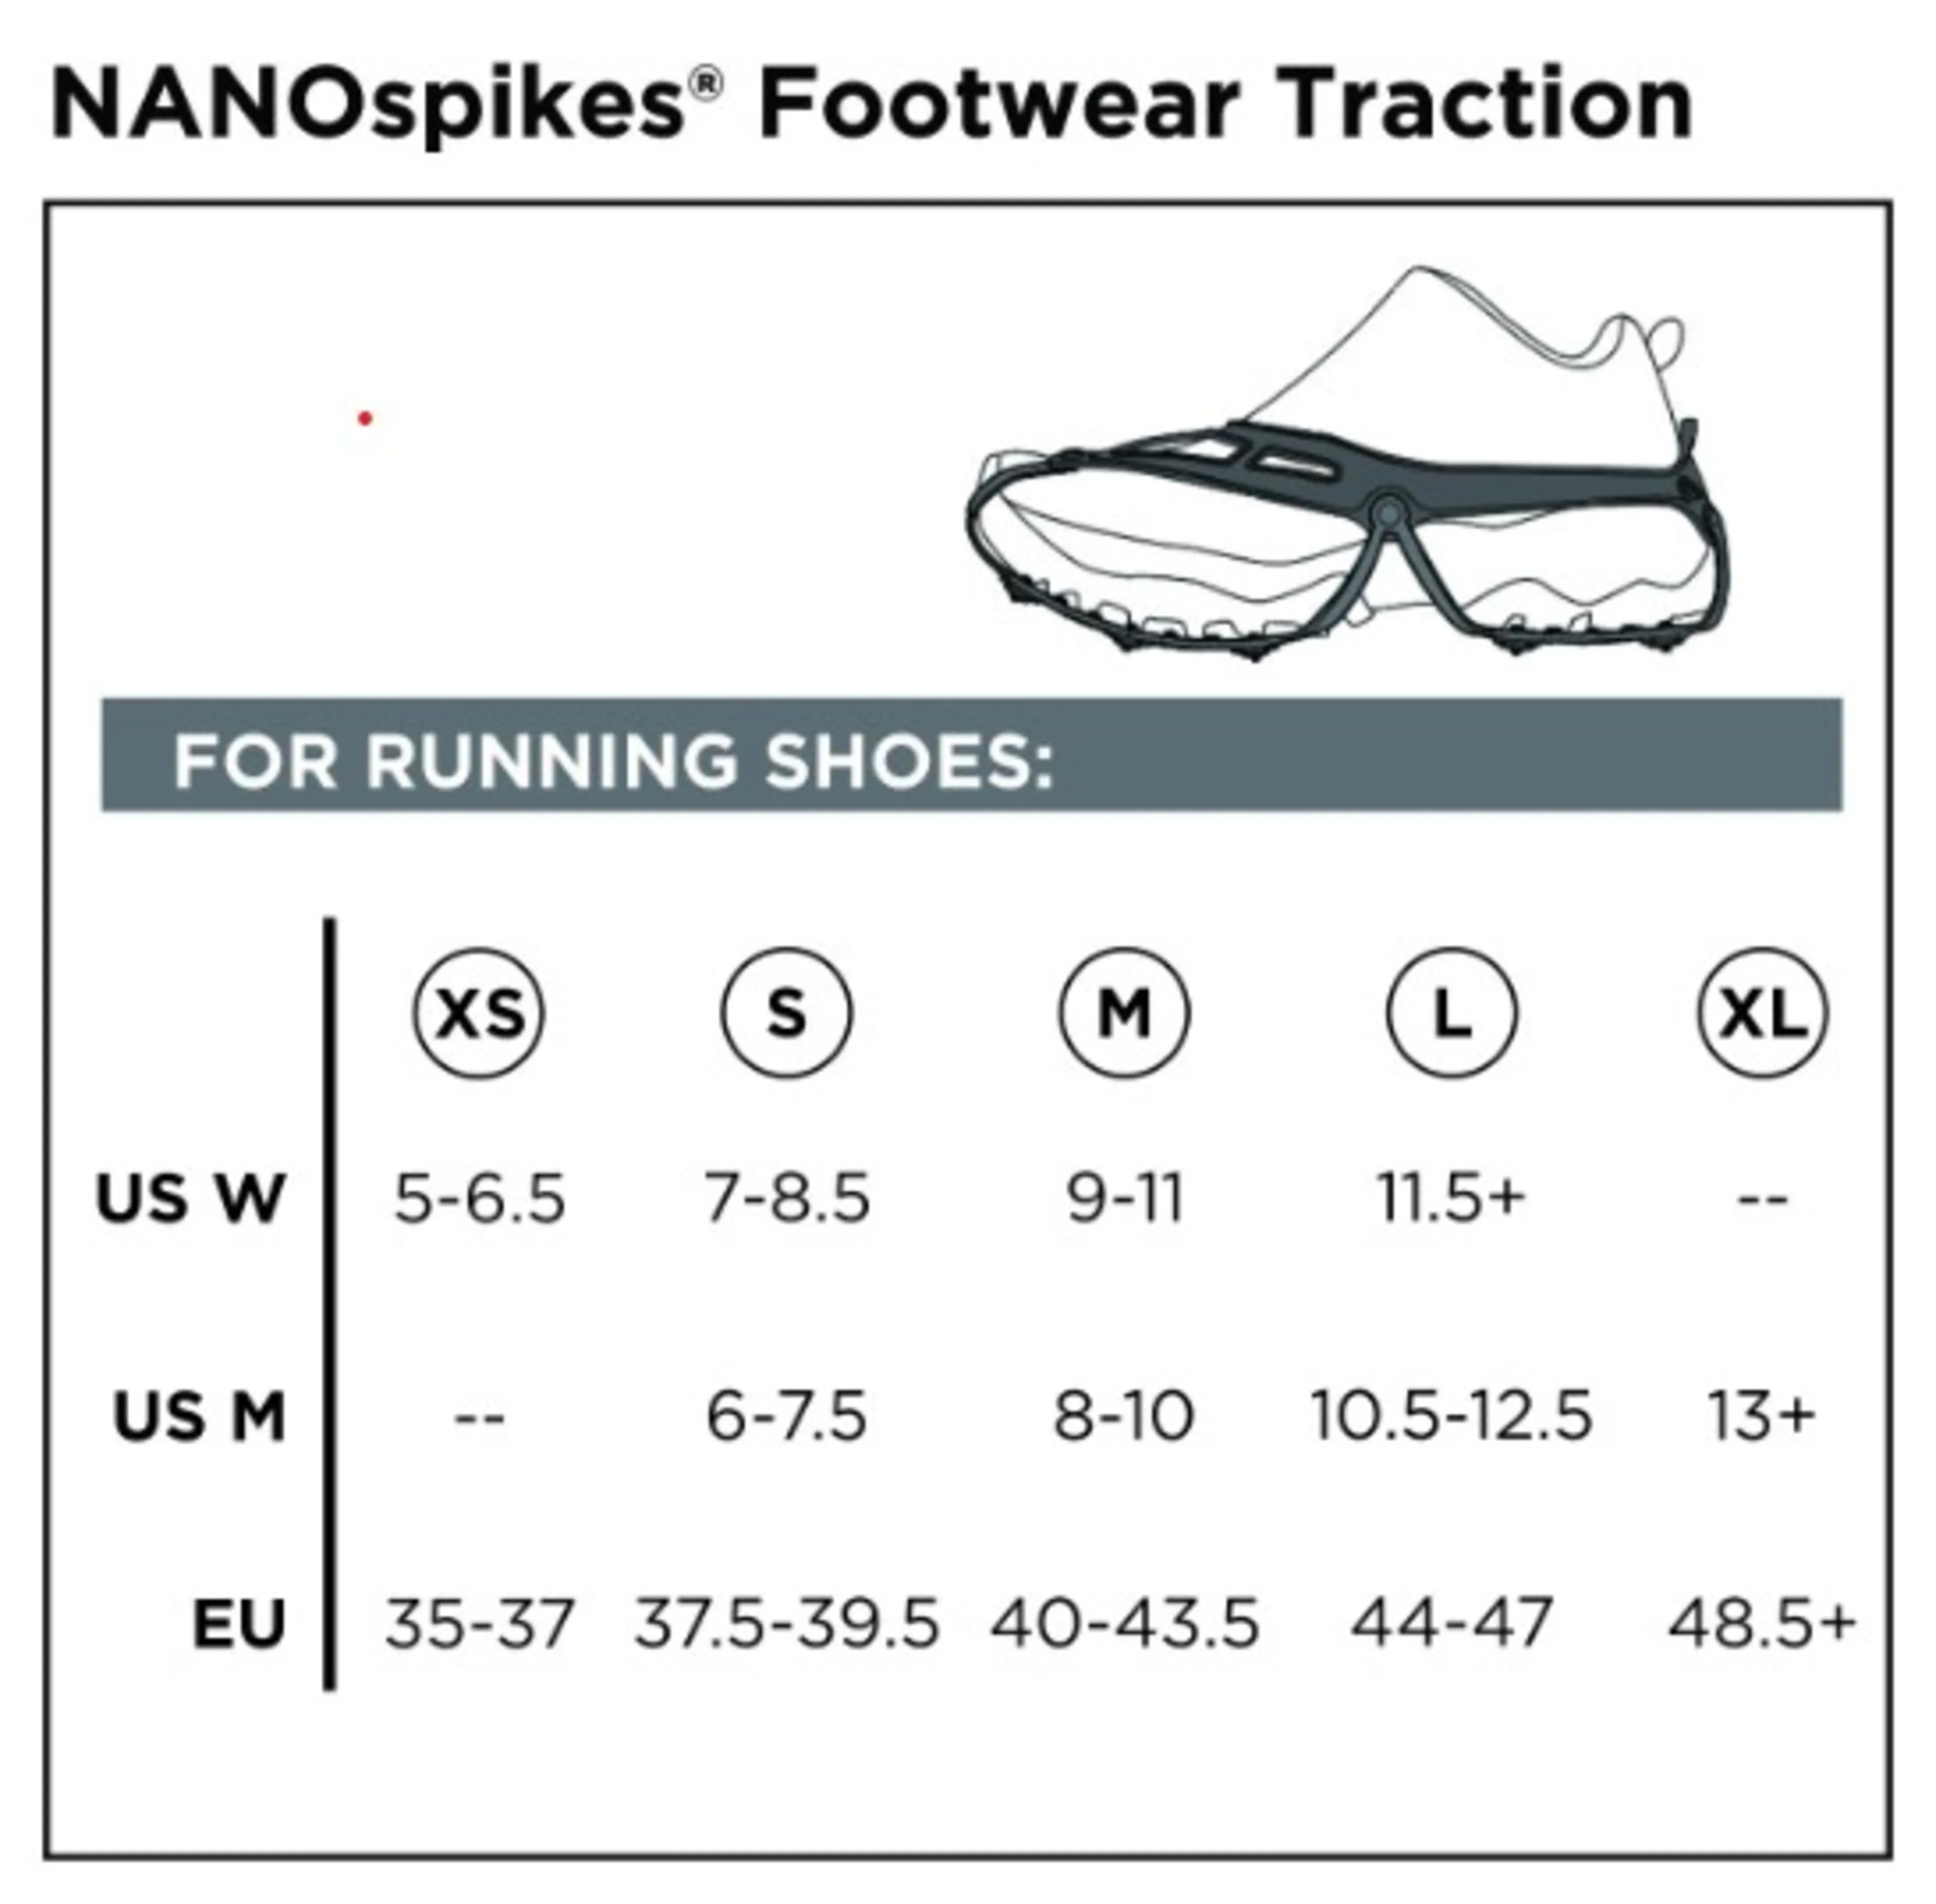 NANOspikes Footwear Traction v2, S